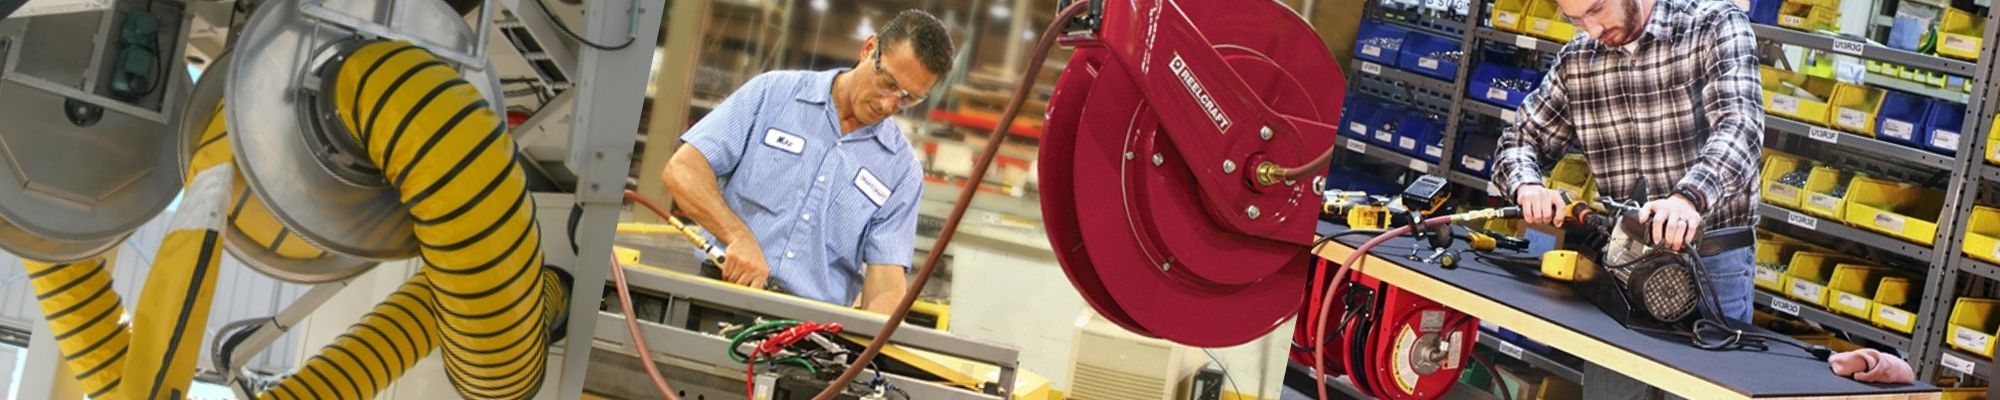 Five Reasons to Use Retractable Air Hose Reels On Your Shop Floor -  International Air Tool & Industrial Supply Company